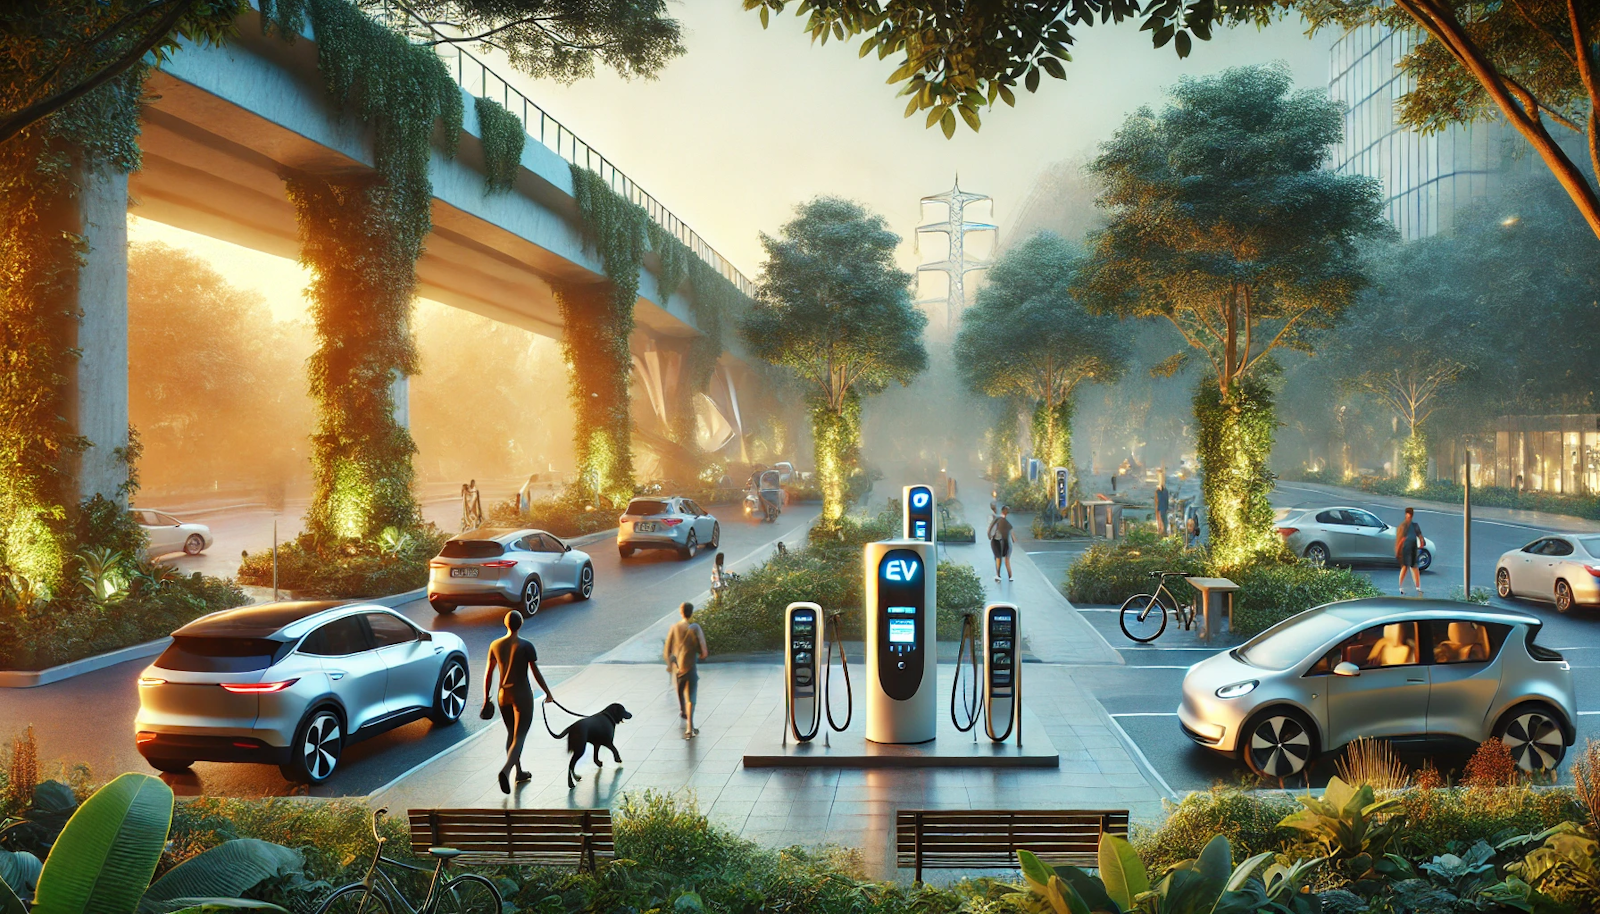 Urban park at dawn with a modern EV charging station, joggers, and greenery, showcasing the integration of technology and nature.